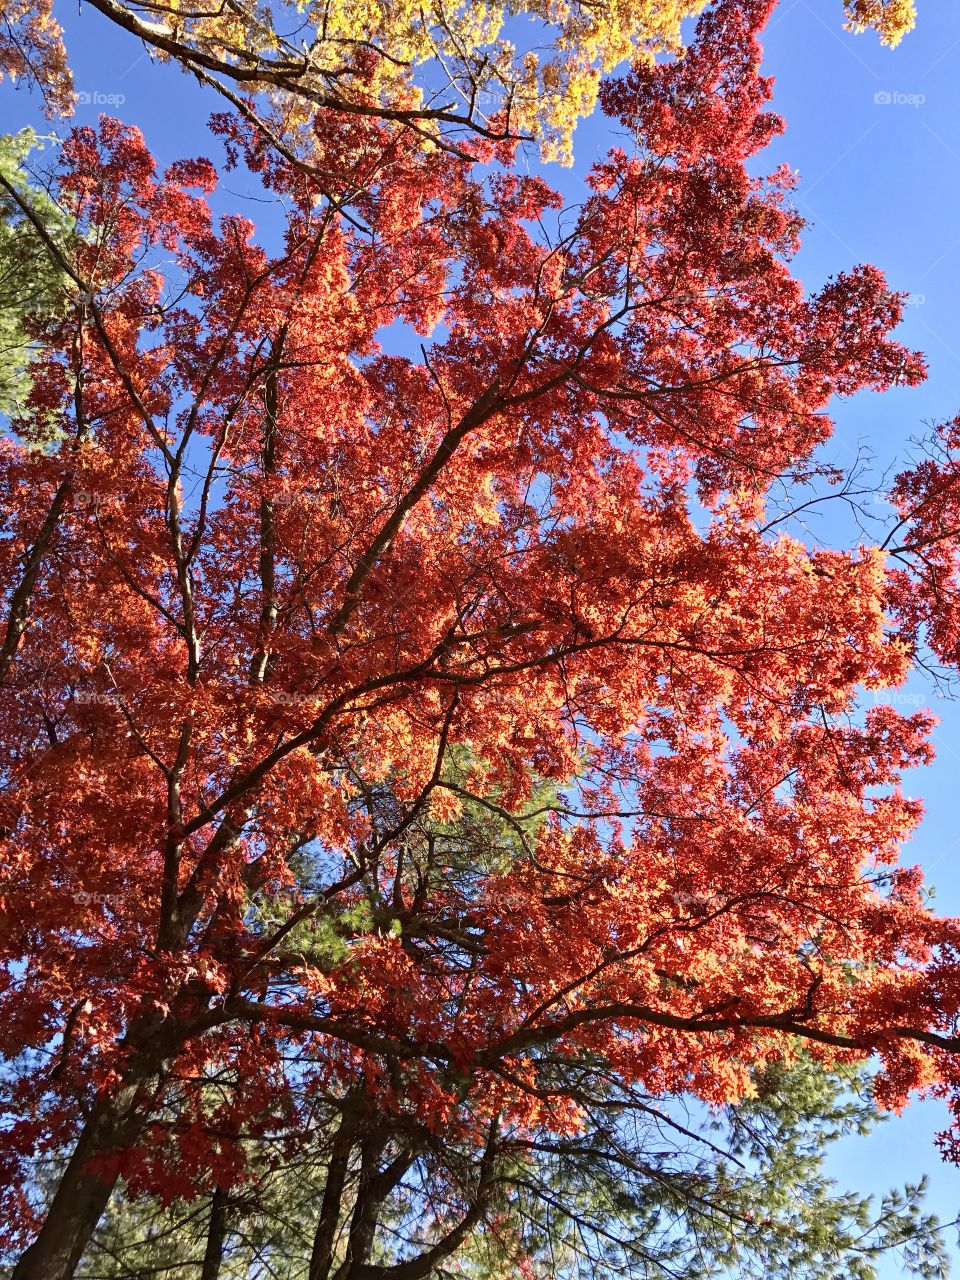 An autumn day in New Hampshire, leaves turning red.